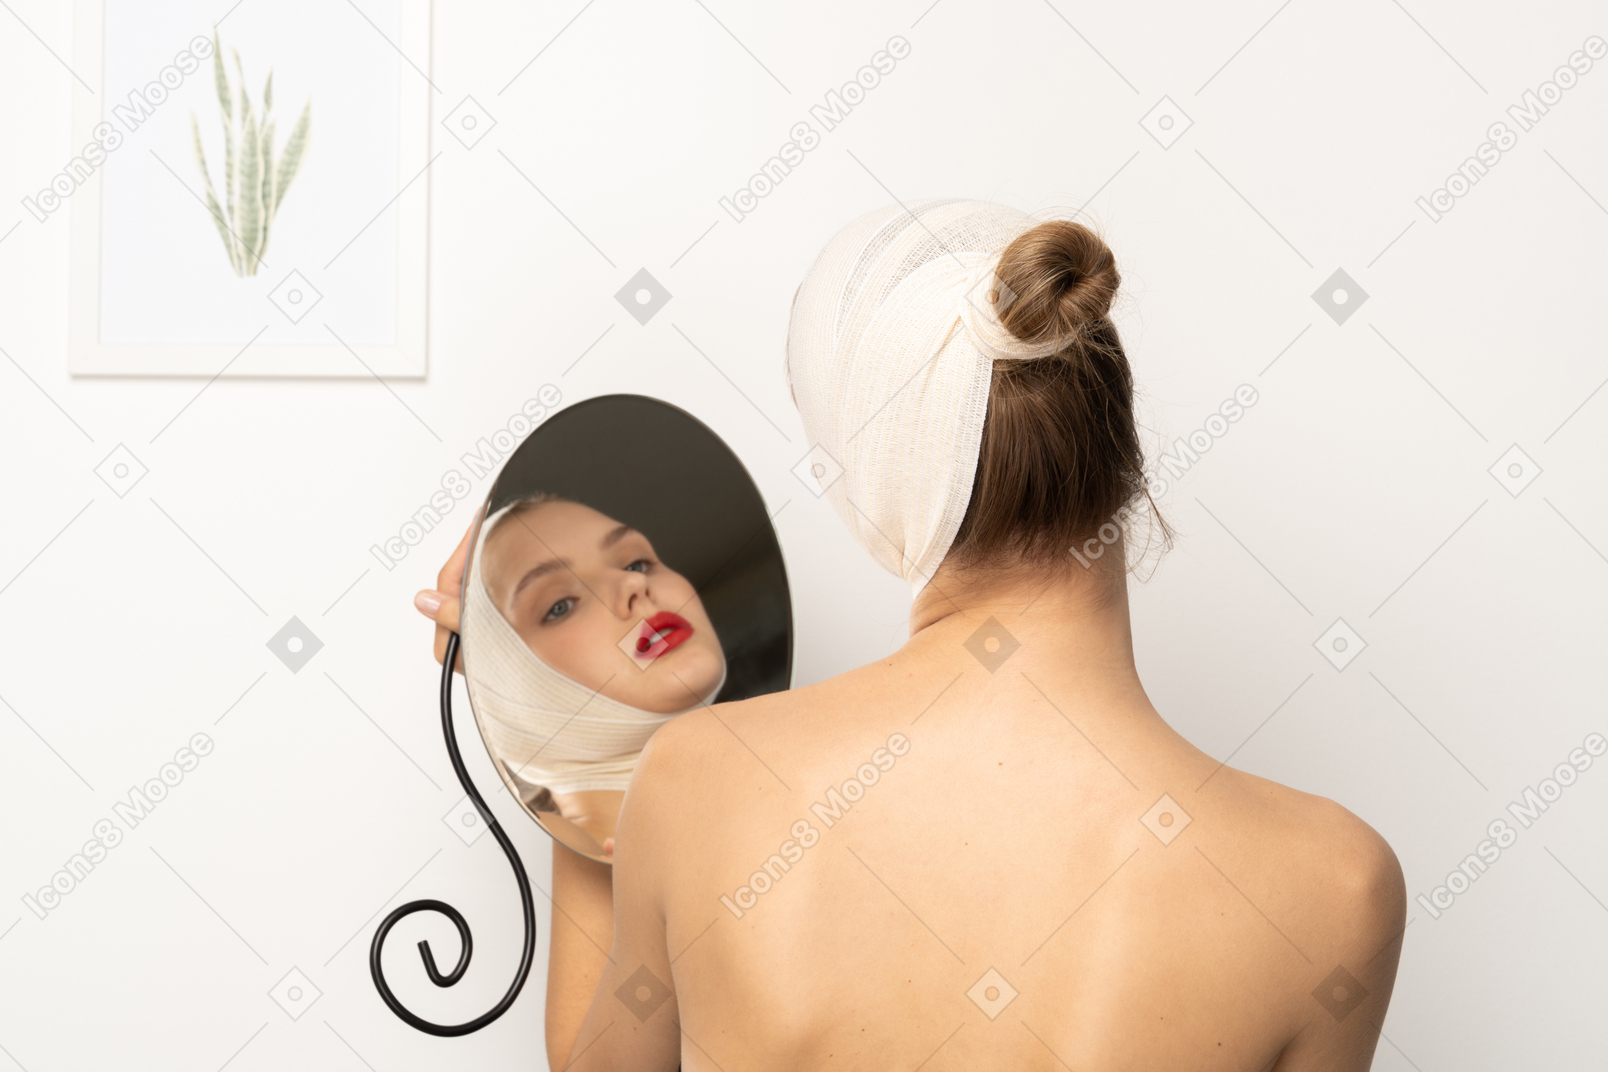 Young woman with bandaged head holding a mirror